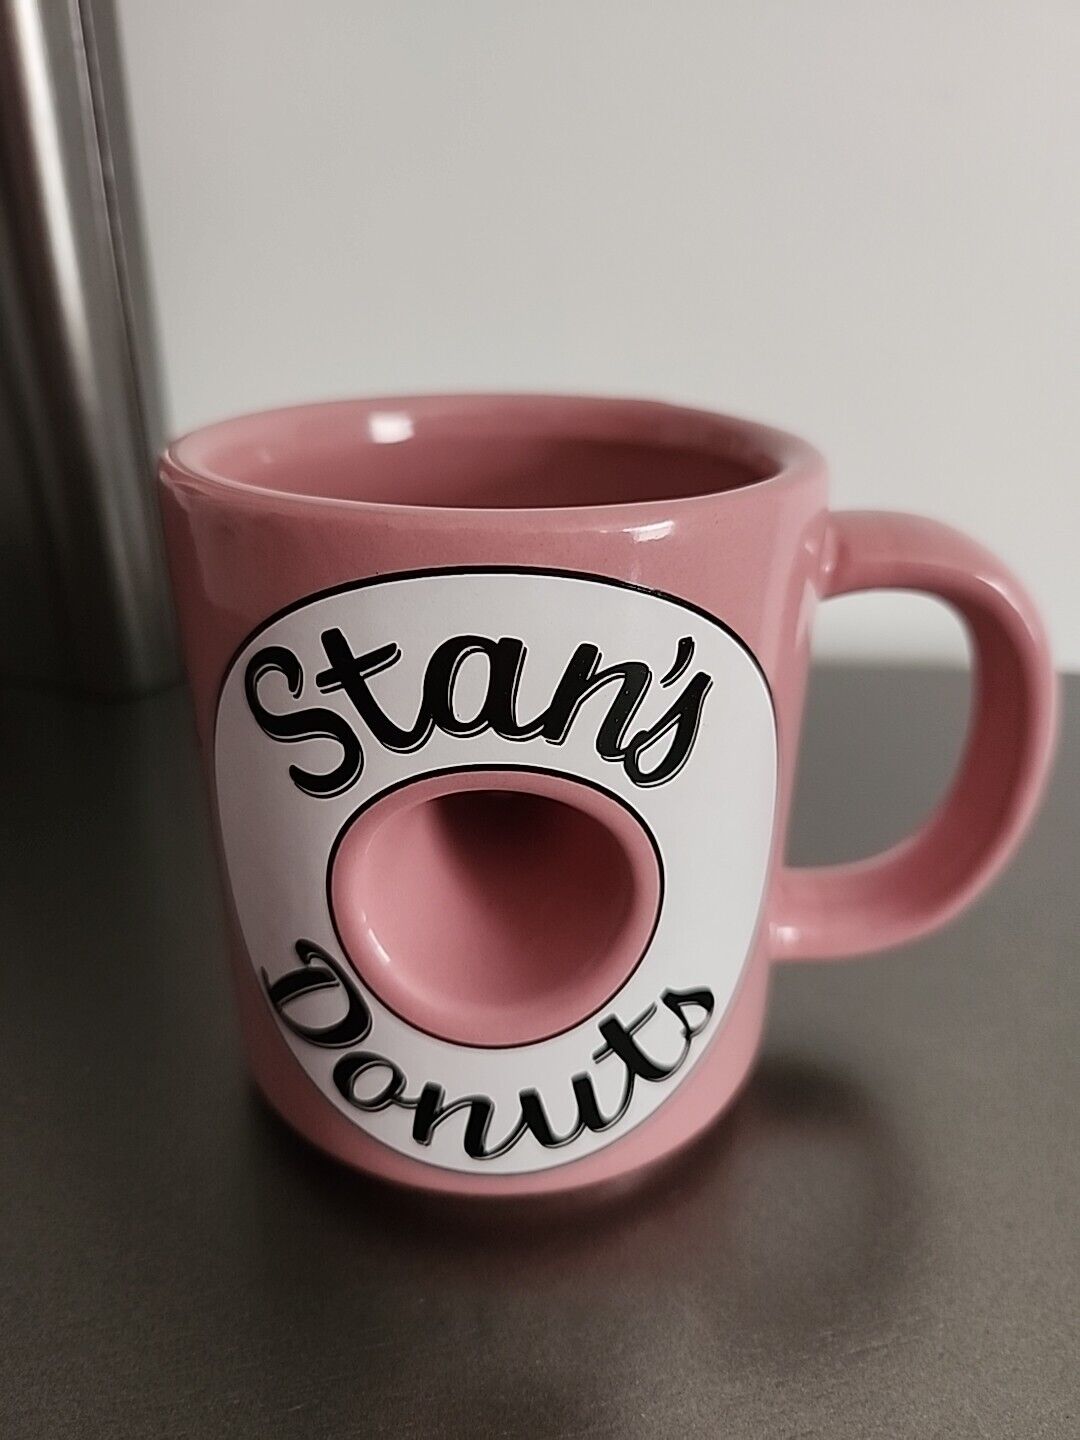 Stan’s Donuts Coffee Mug Doughnut Hole Cup Ceramic Vintage 4” Tall Made In USA